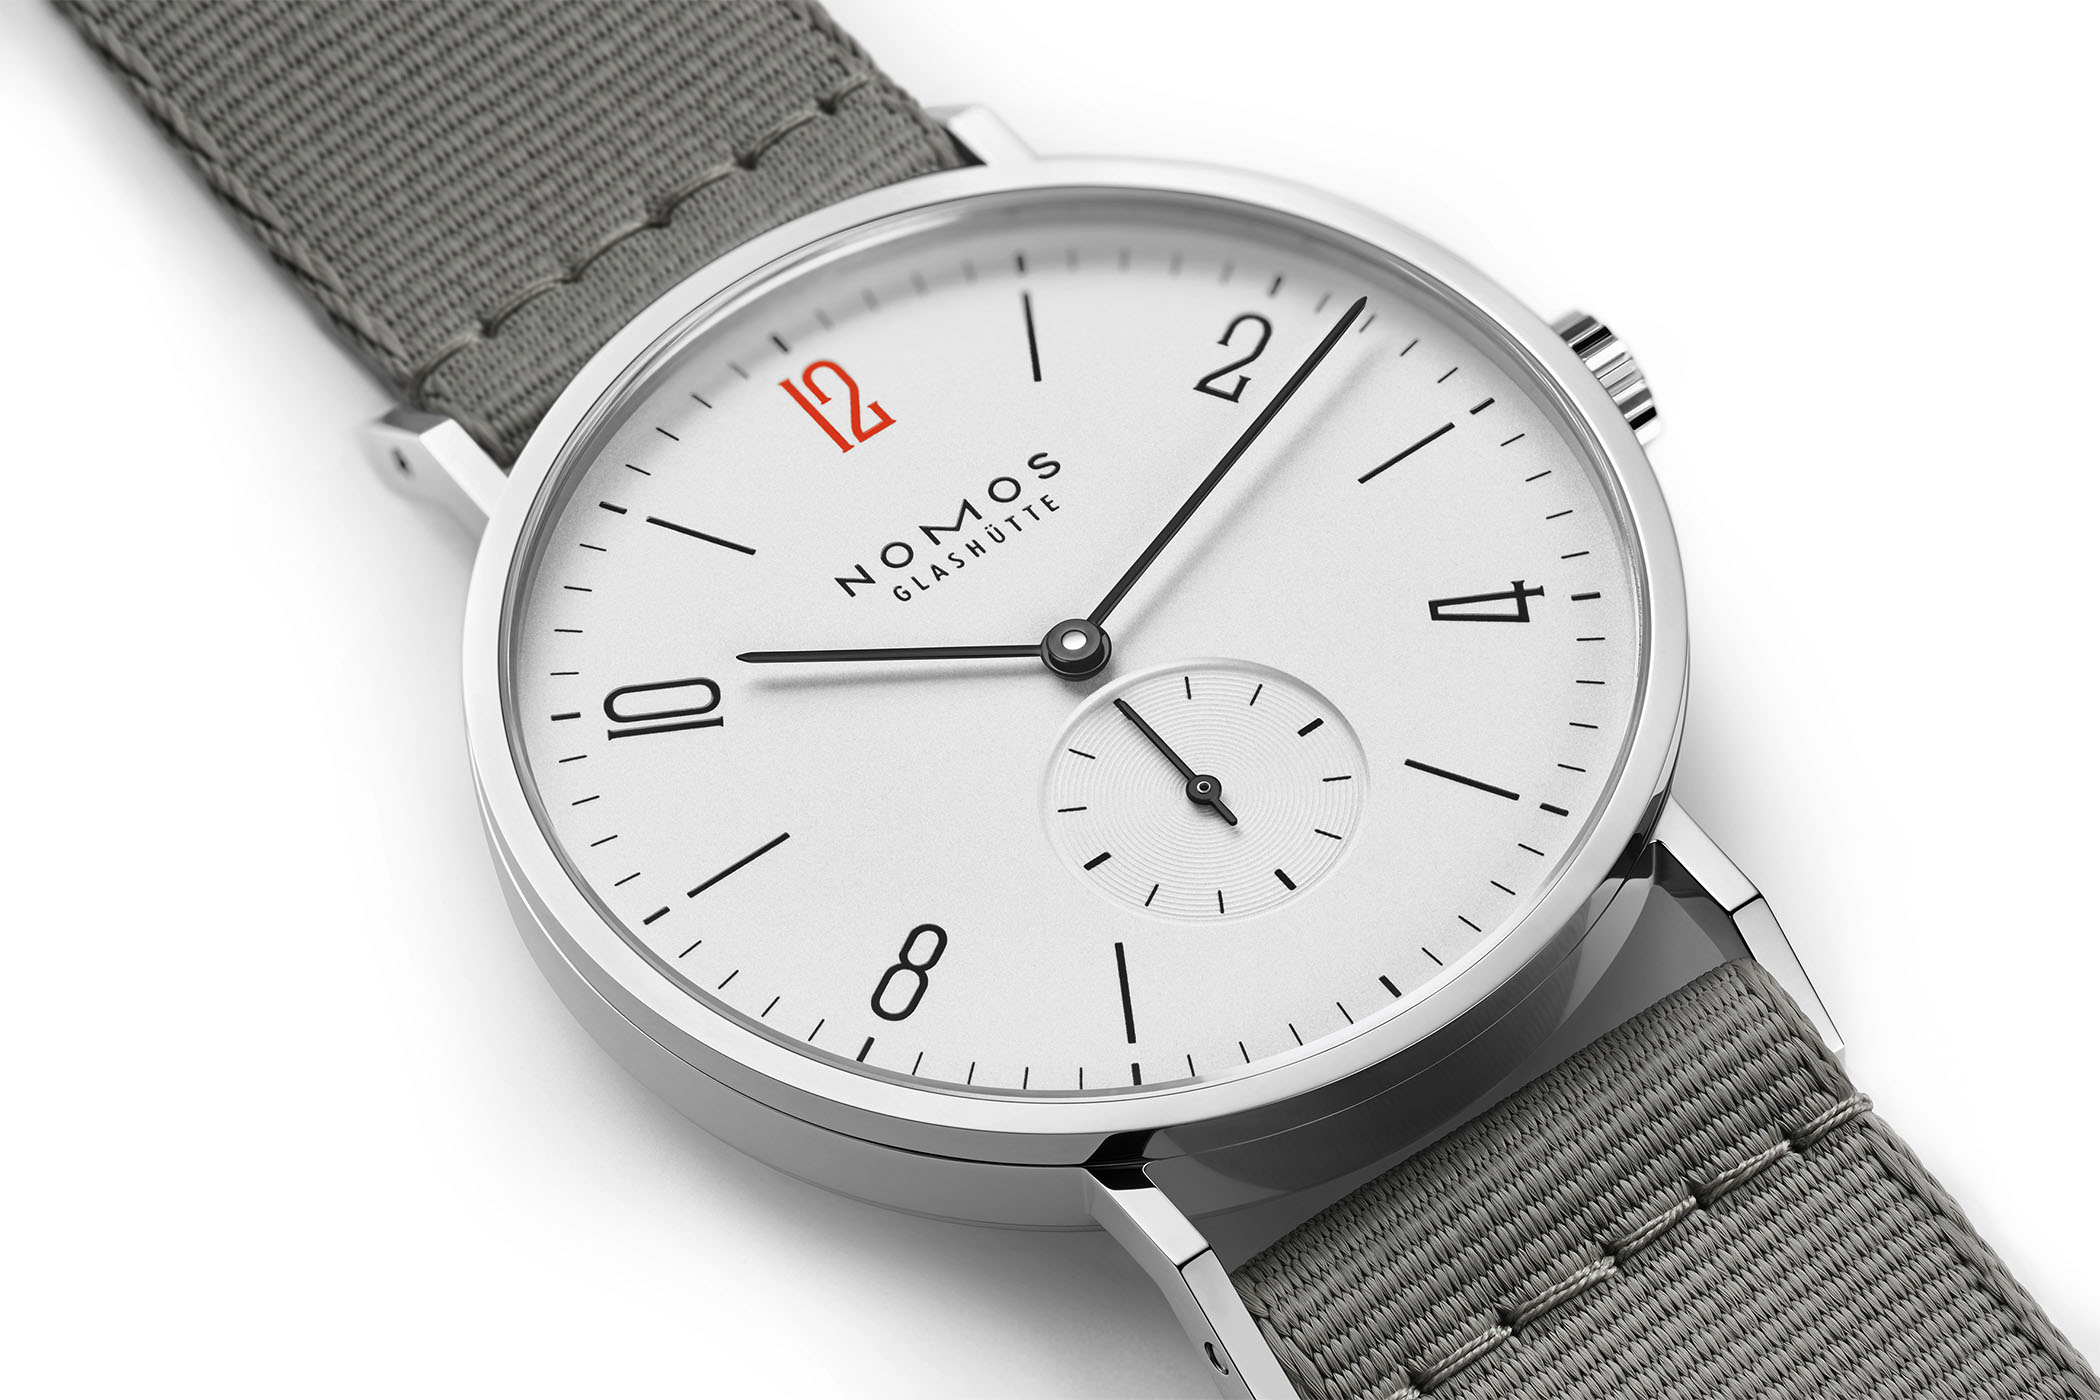 Nomos Tangente 38 MSF - 50 years of Doctors Without Borders